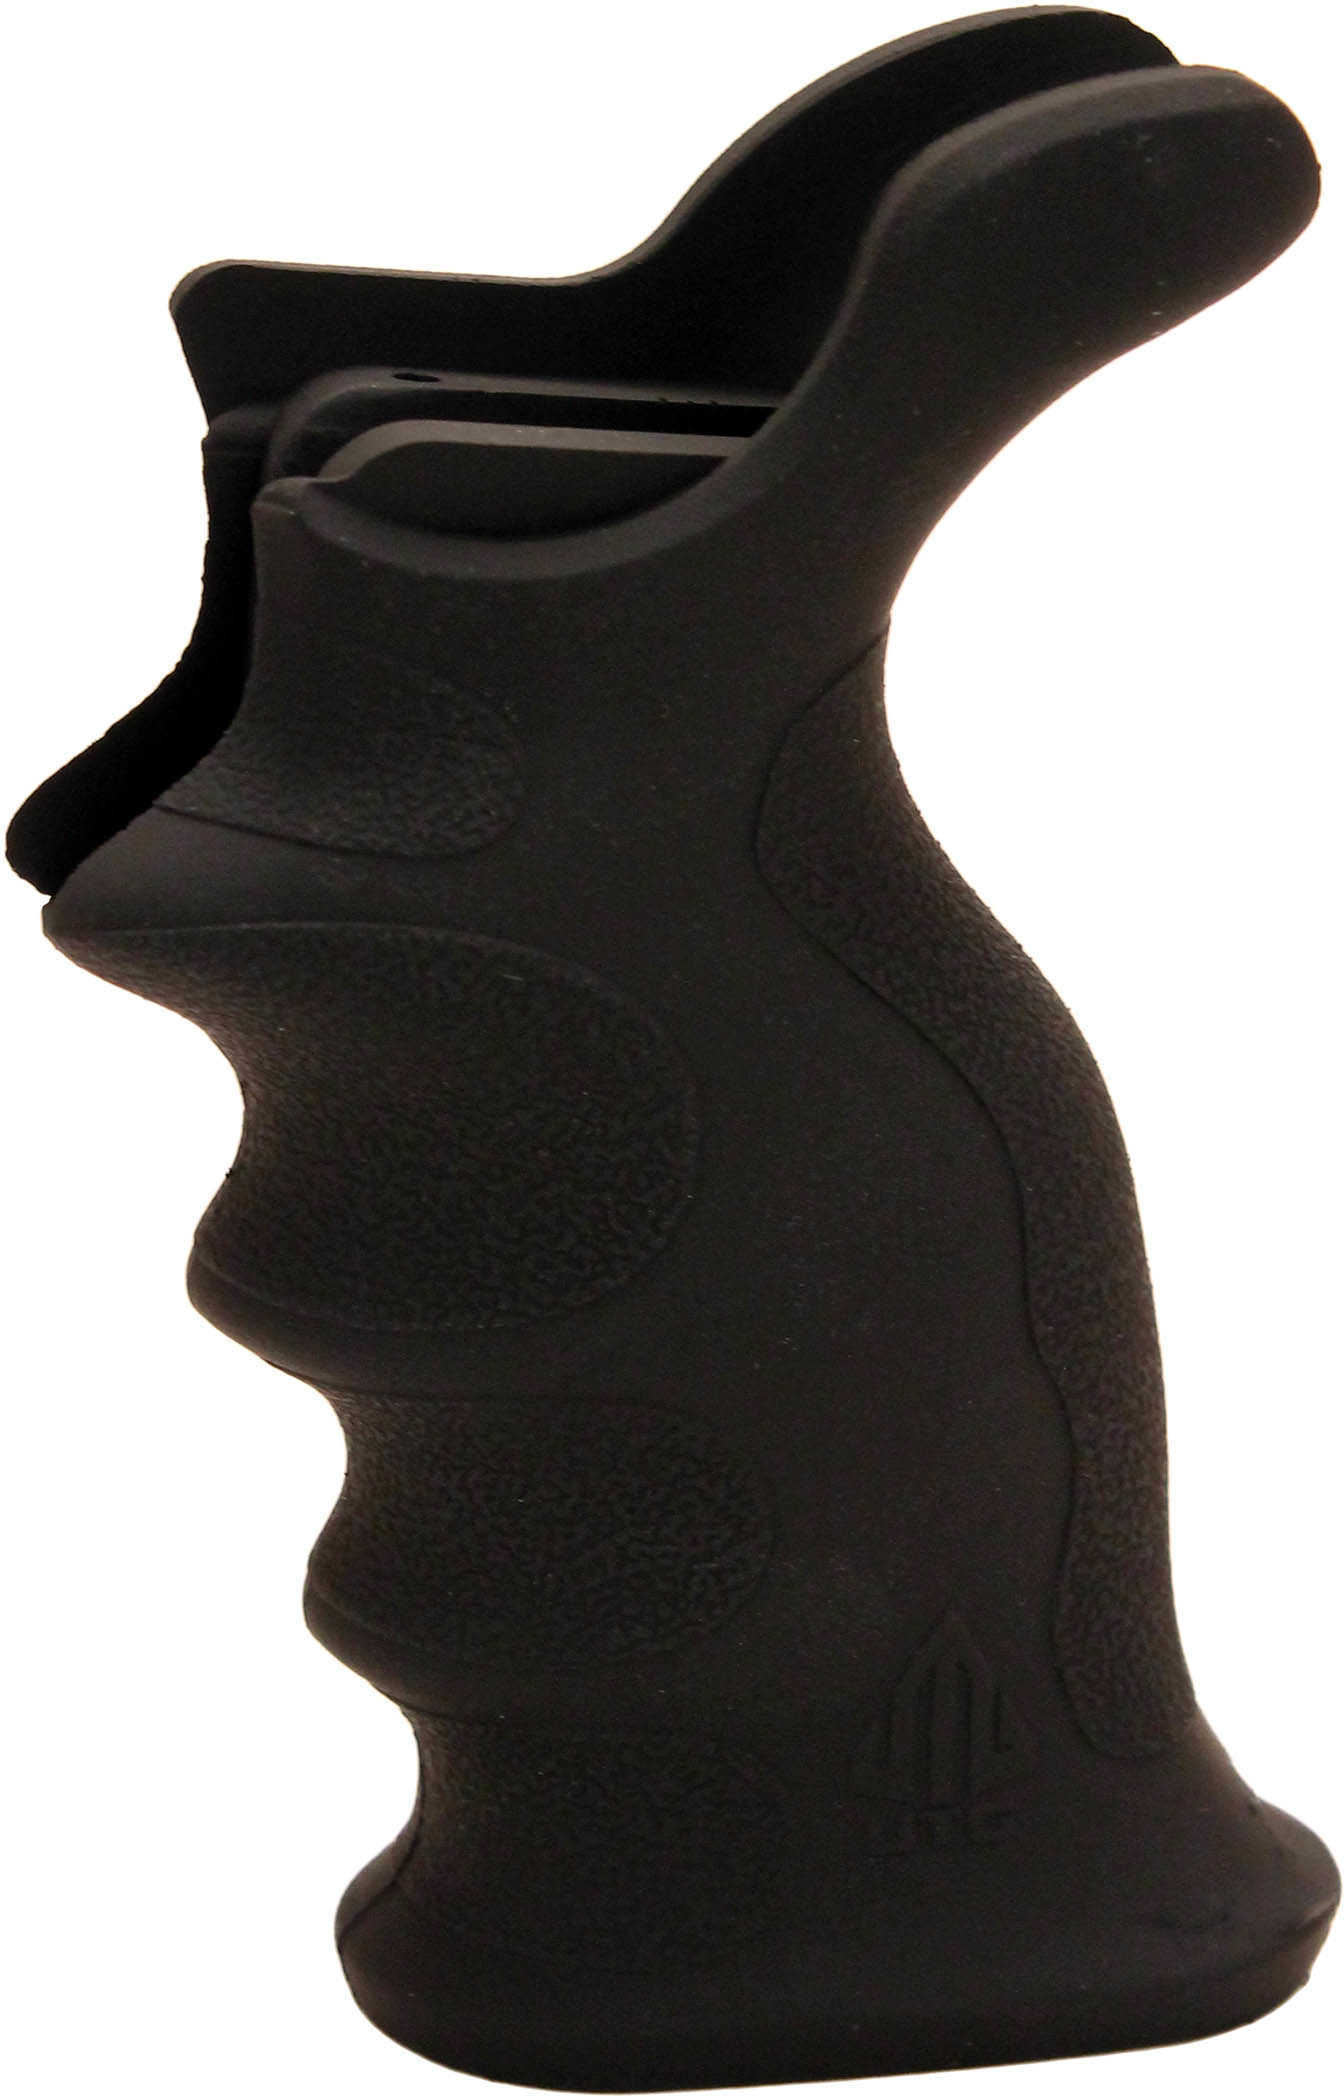 Leapers Inc. - UTG Model 4 Combat Sniper Pistol Grip Fits AR-15/M16 Contoured Finger Grooves with Storage Compartment Bl